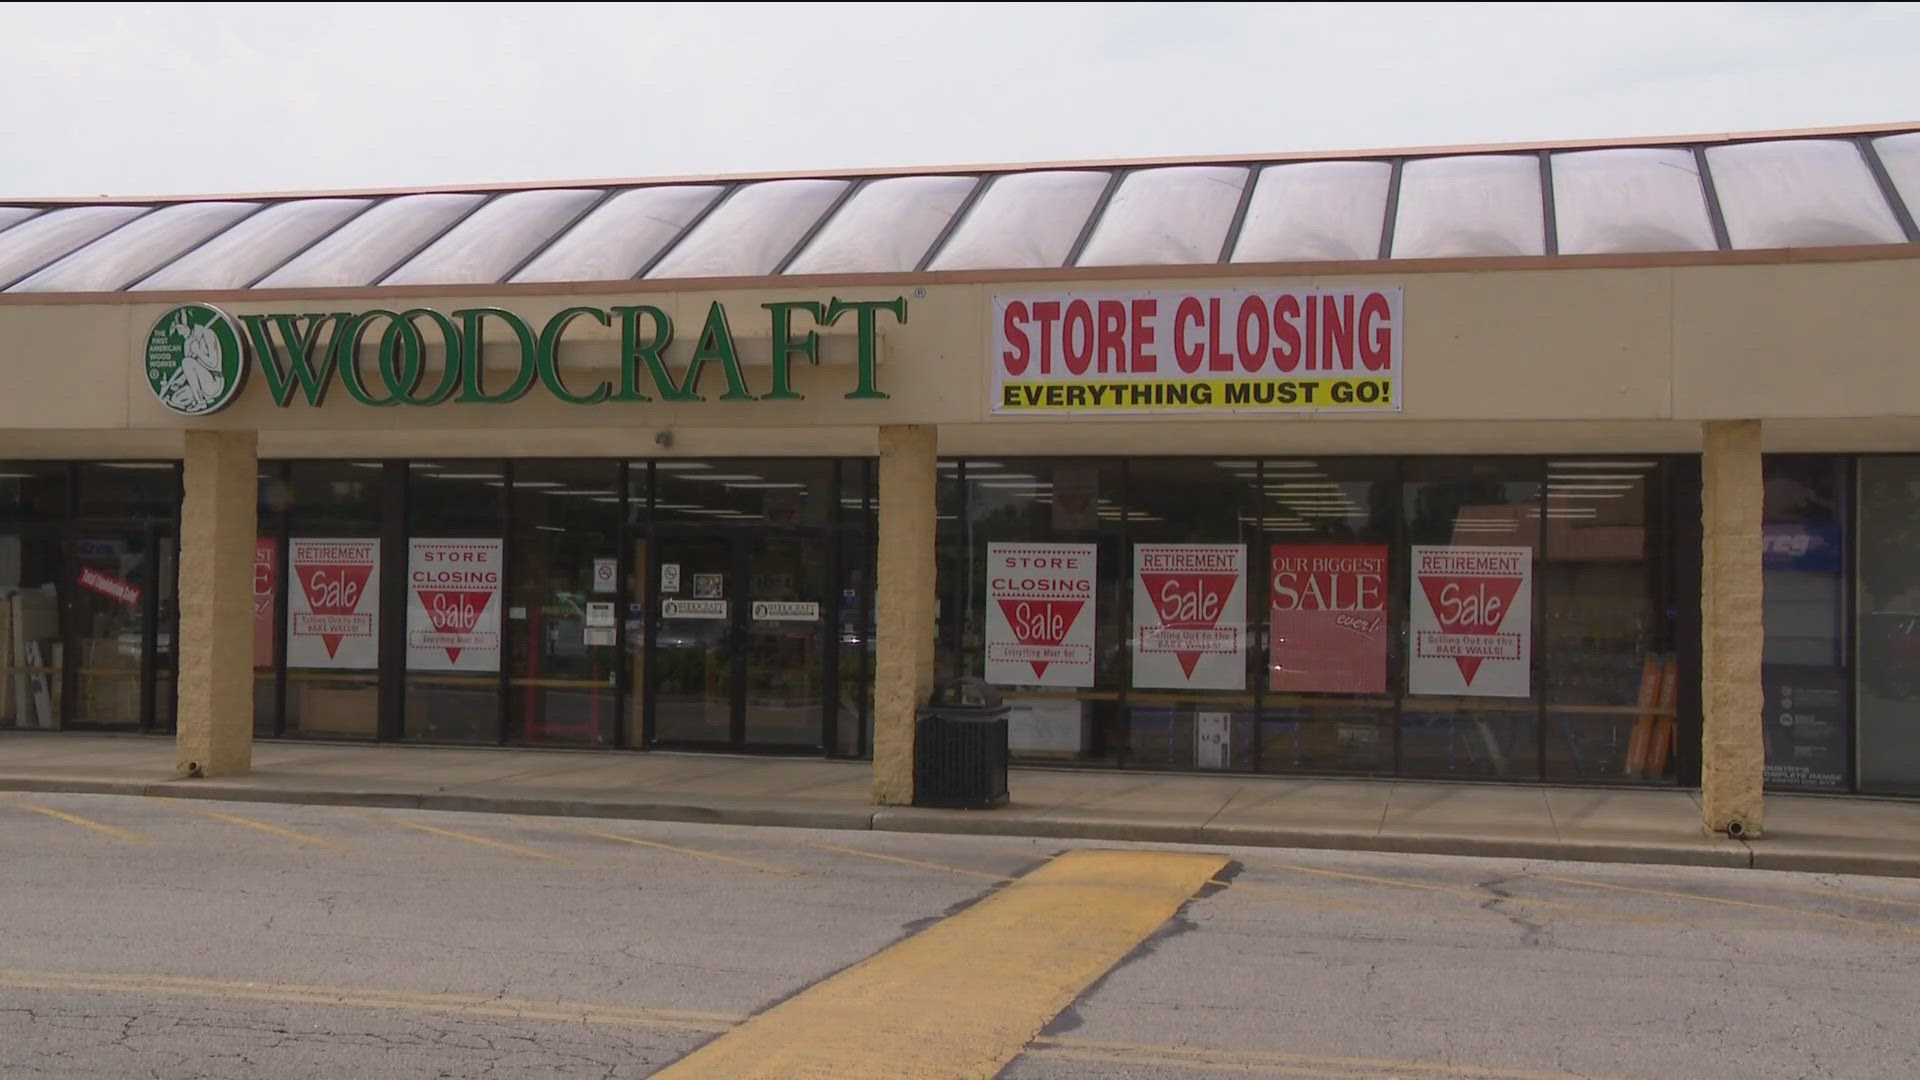 Shoppers have enjoyed the unique offerings at Woodcraft including hard-to-find supplies. After nearly 18 years, the store will be closing for retirement.